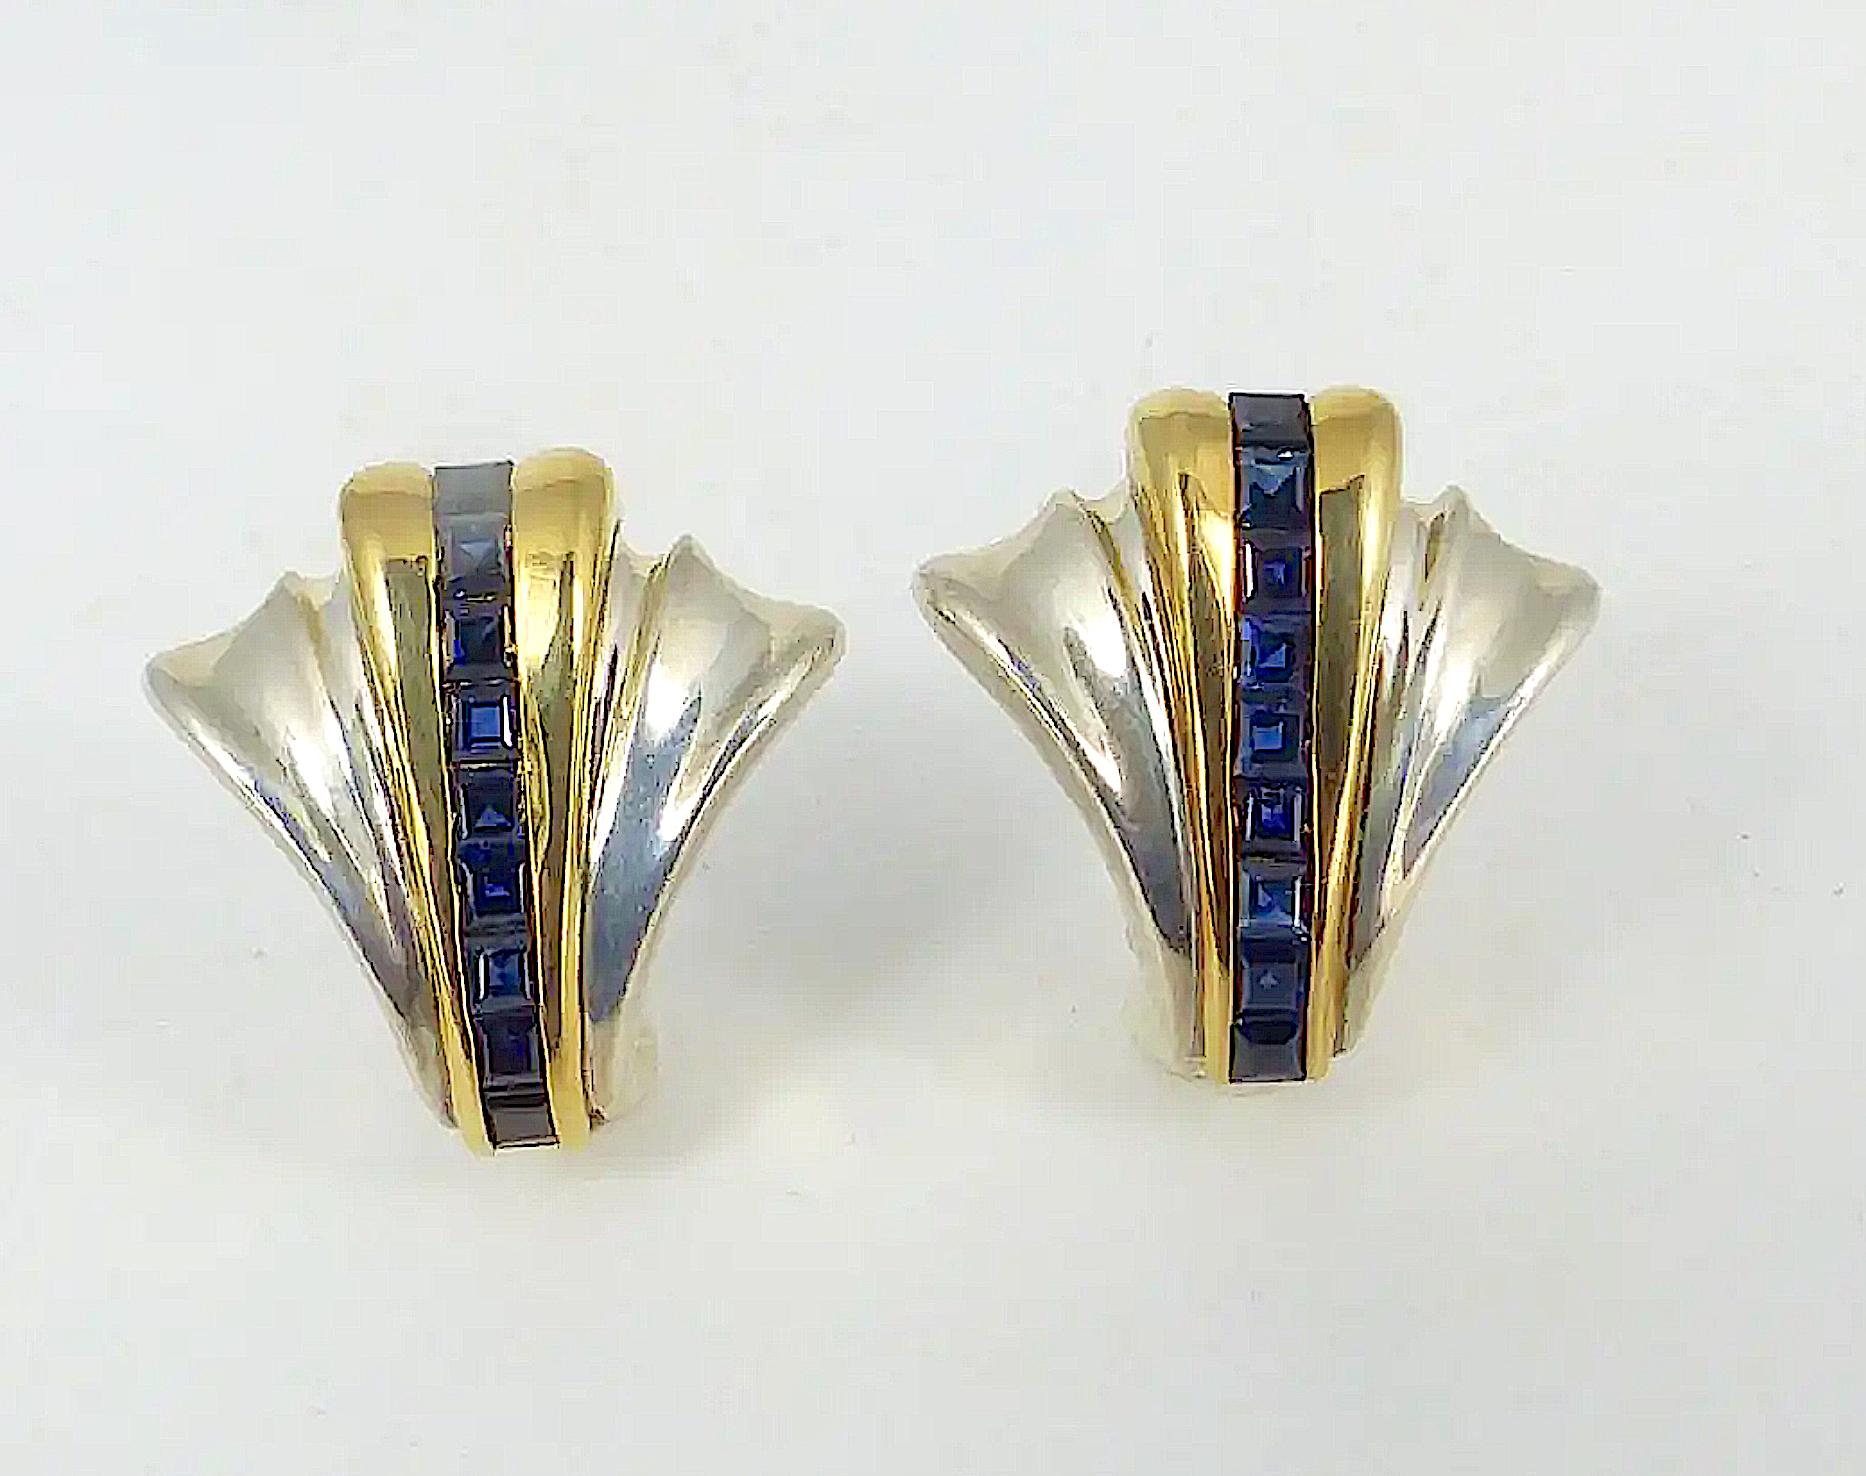 Stunning Art Deco Style Tiffany & Co. Sterling Silver, 14 Kt. yellow gold and Sapphire Fan Form Earrings.
A lovely pair of earrings by Tiffany  & Company crafted of sterling silver having an Art Deco style fan design and featuring 18 emerald cut